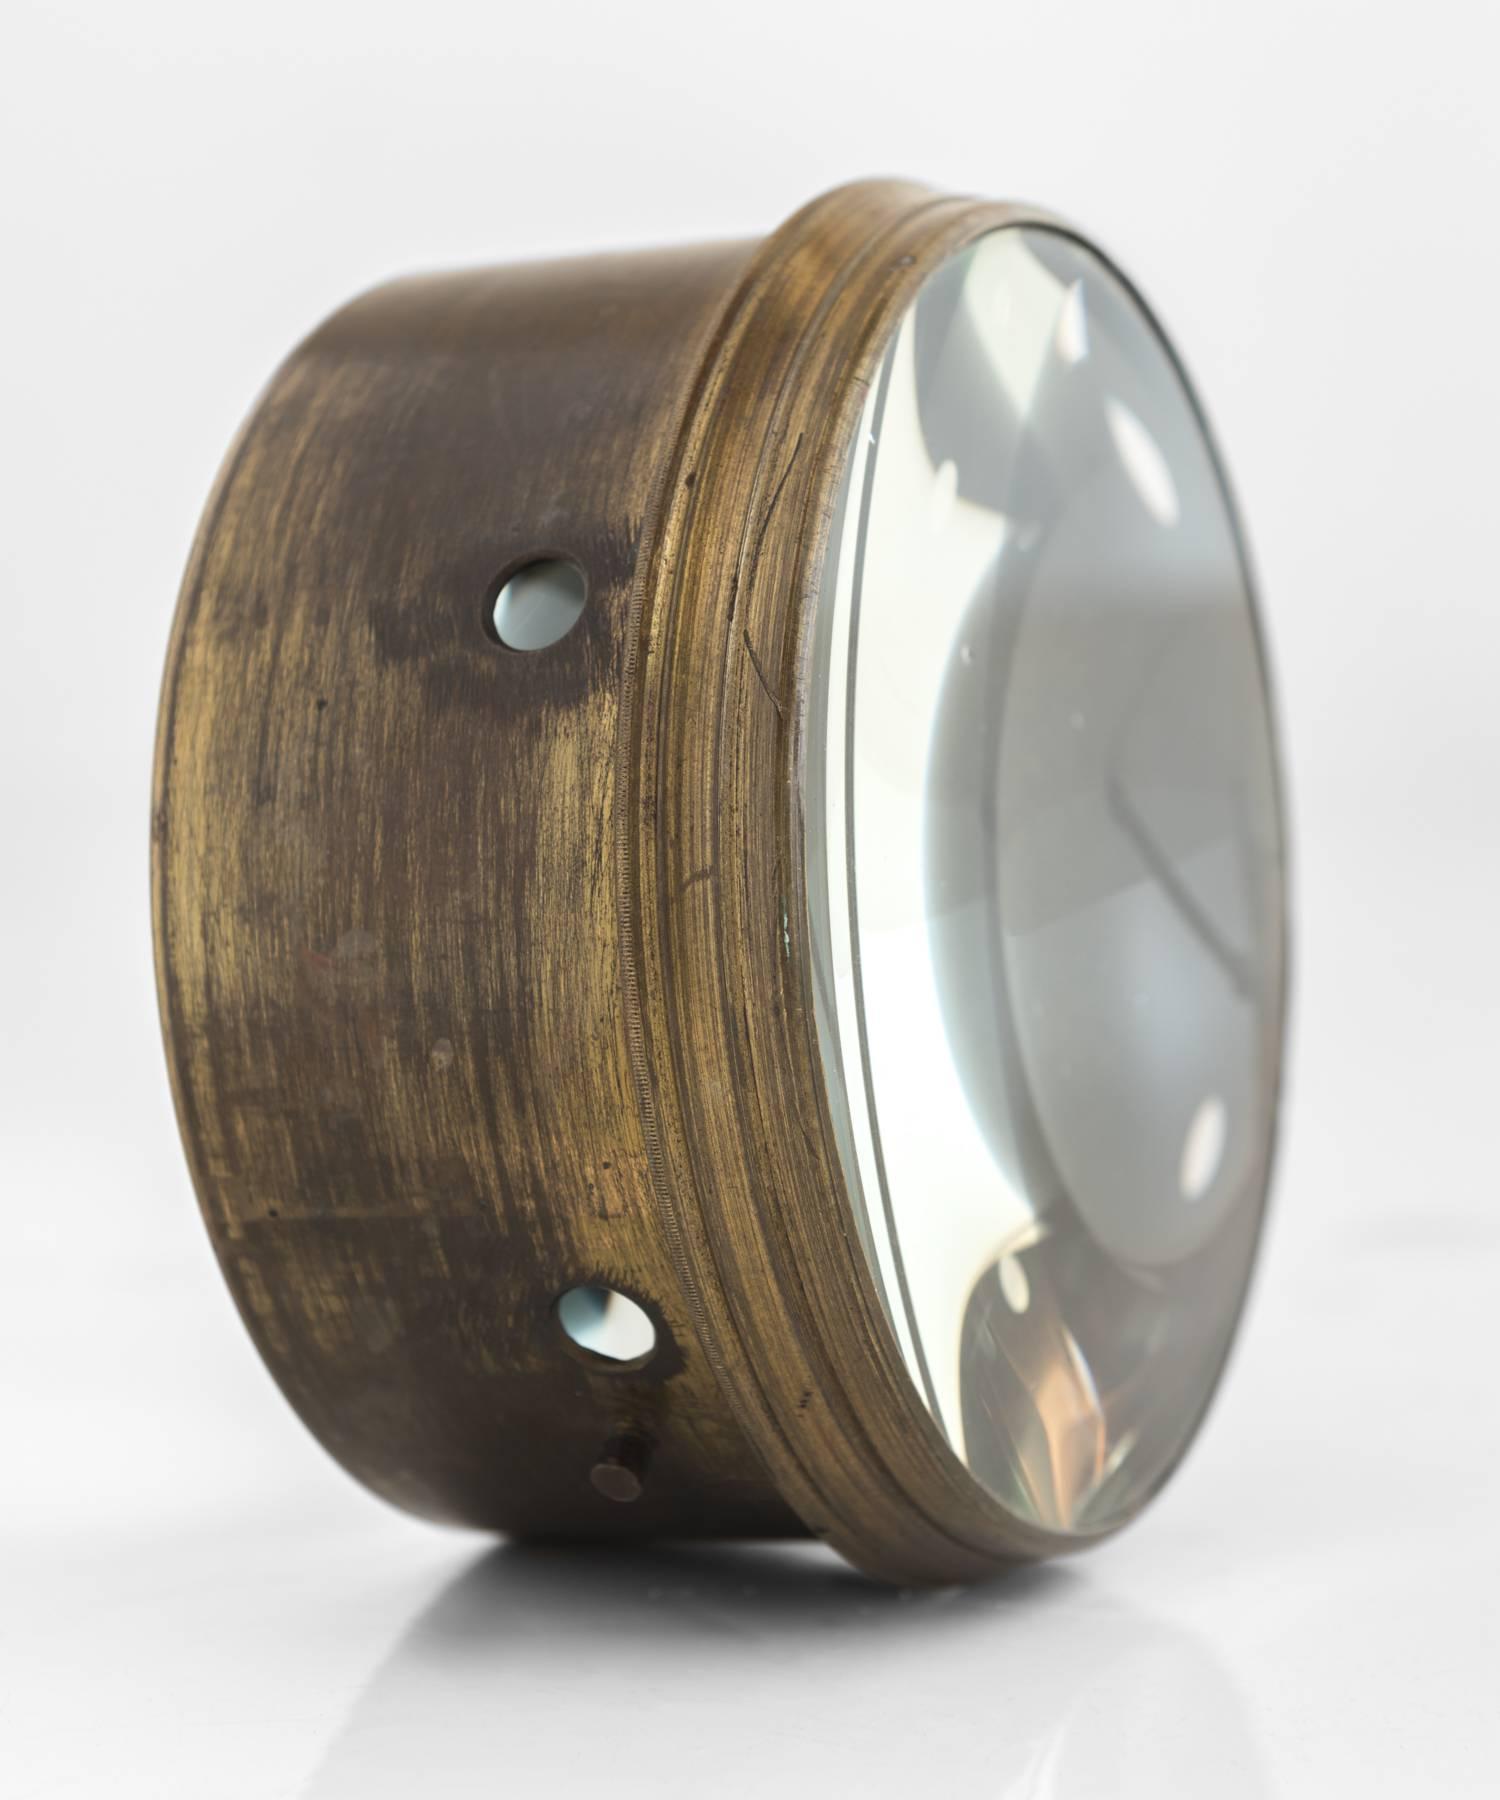 English Small Brass and Glass Magnifying Lens, circa 1910